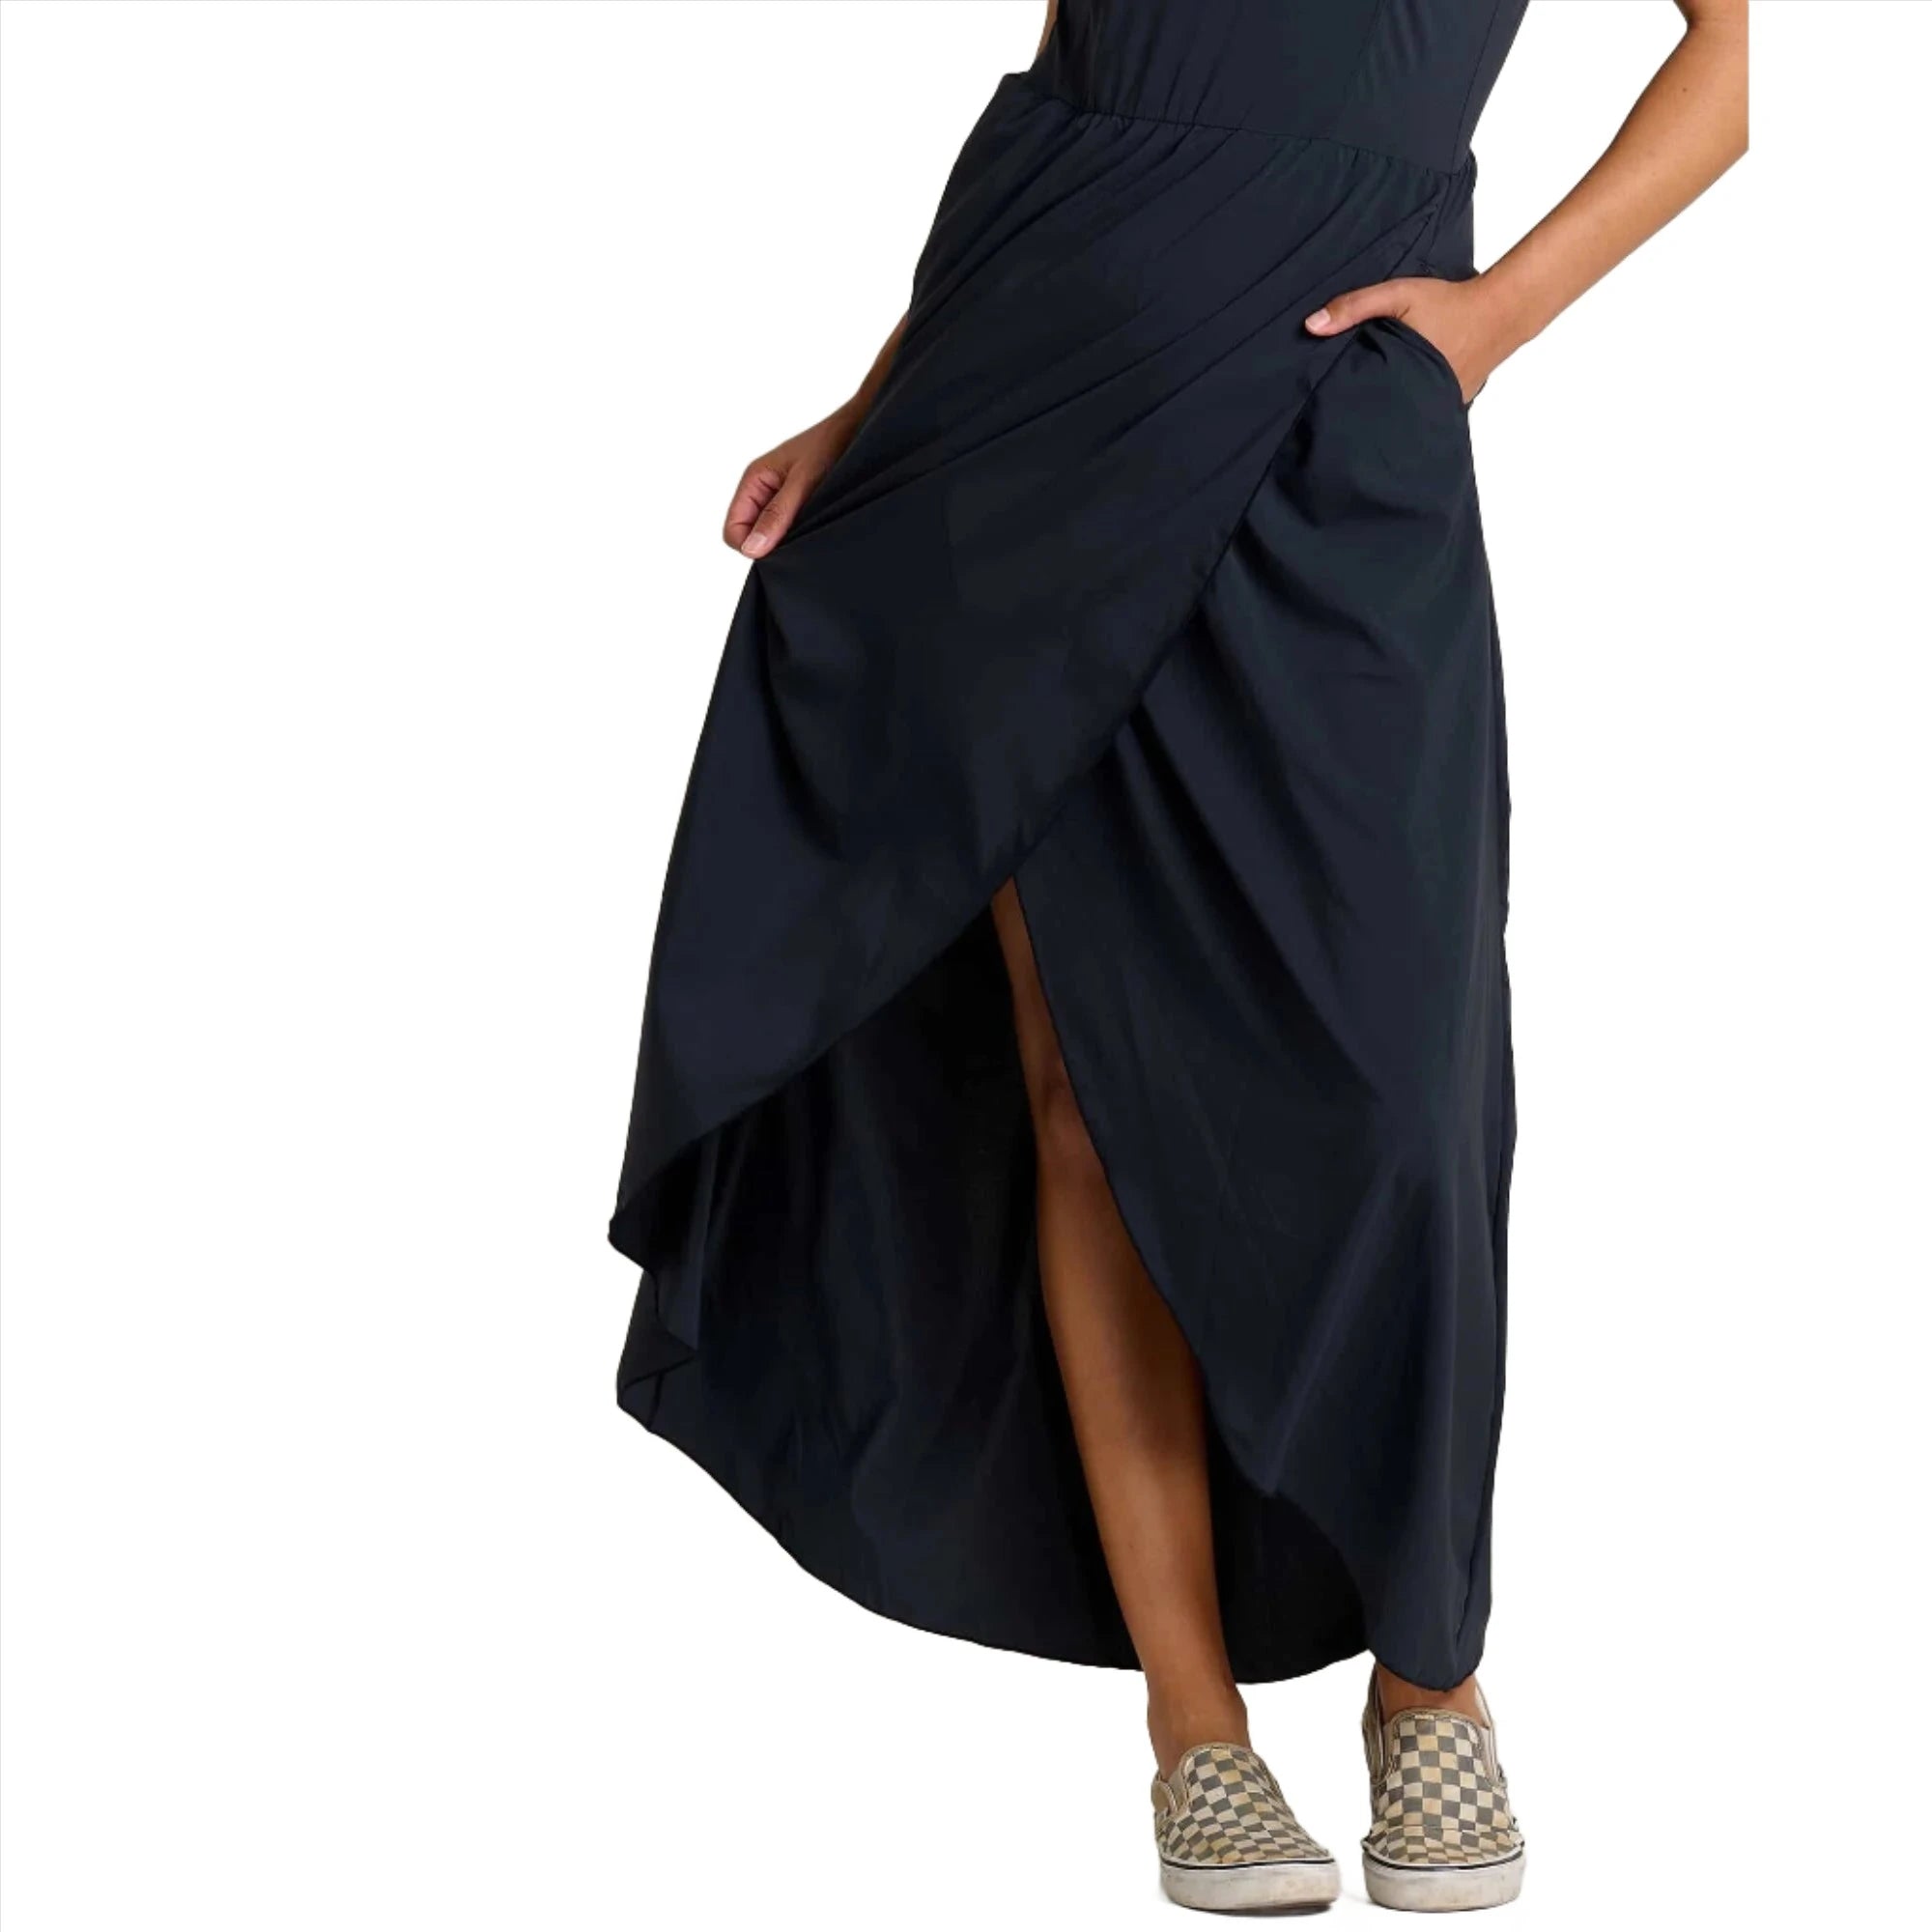 Toad&Co W's Sunkissed Maxi Dress, Black, front view of bottom half on model